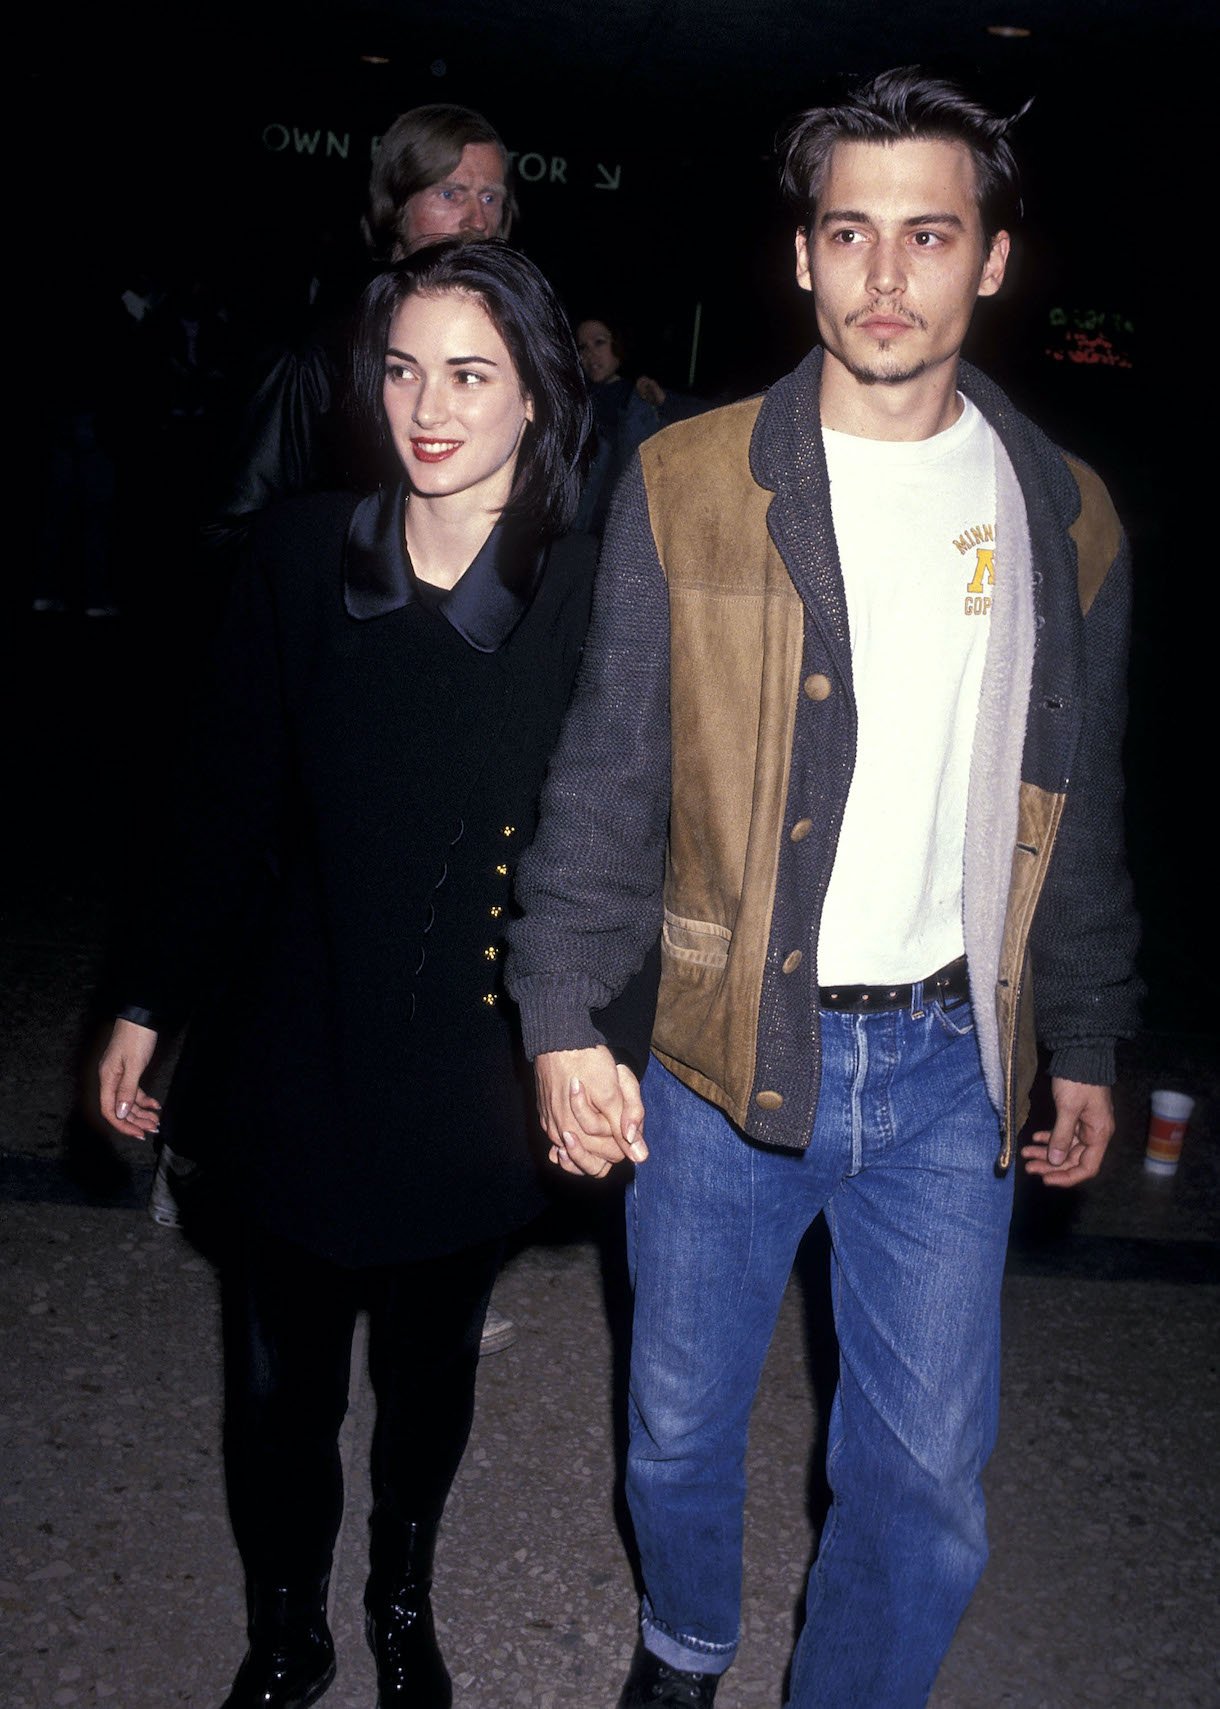 Winona Ryder and actor Johnny Depp attend 'The Silence of the Lambs' premiere in 1991